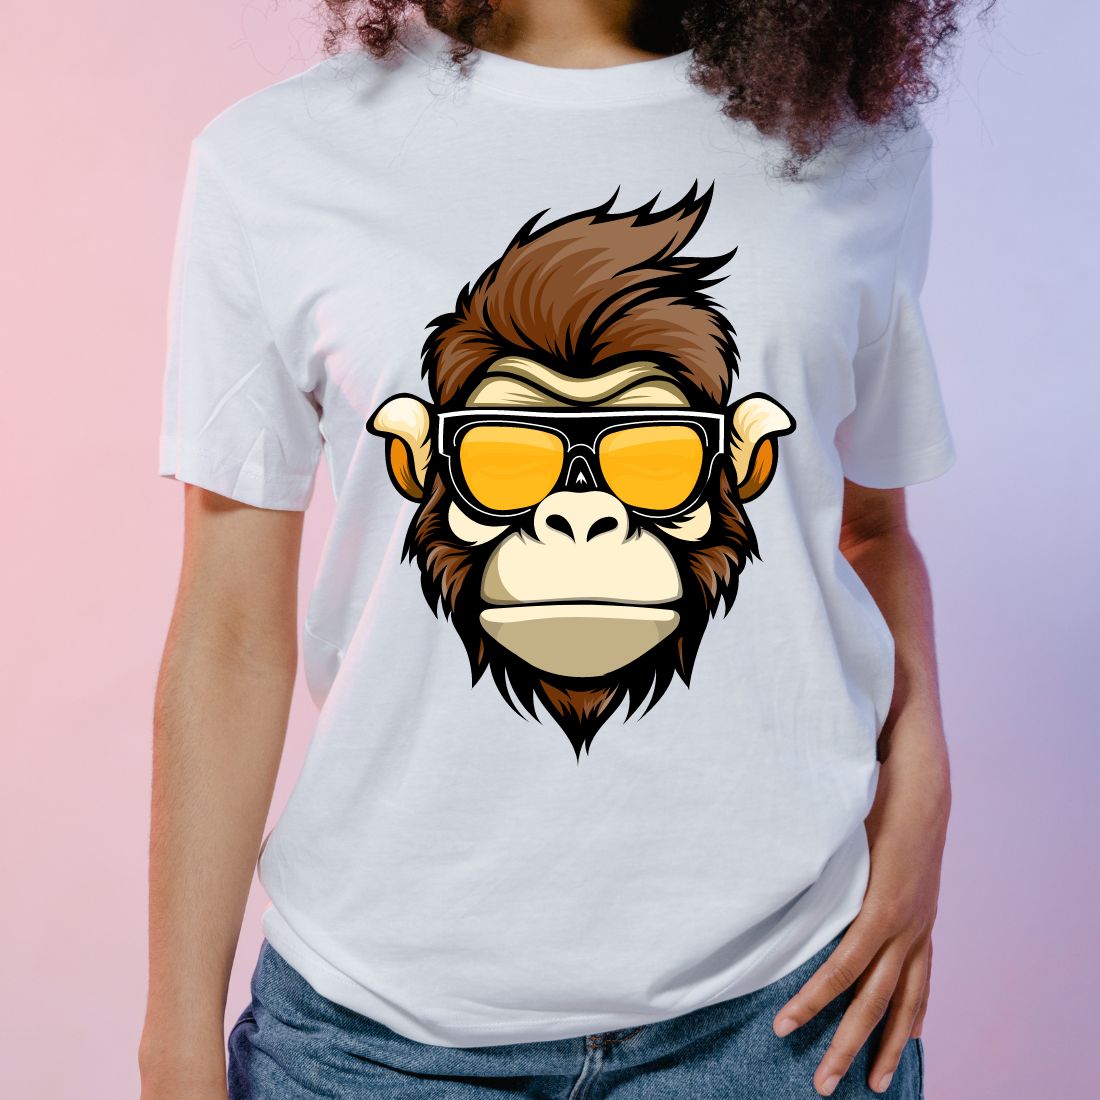 Cute and funny monkey face design preview image.